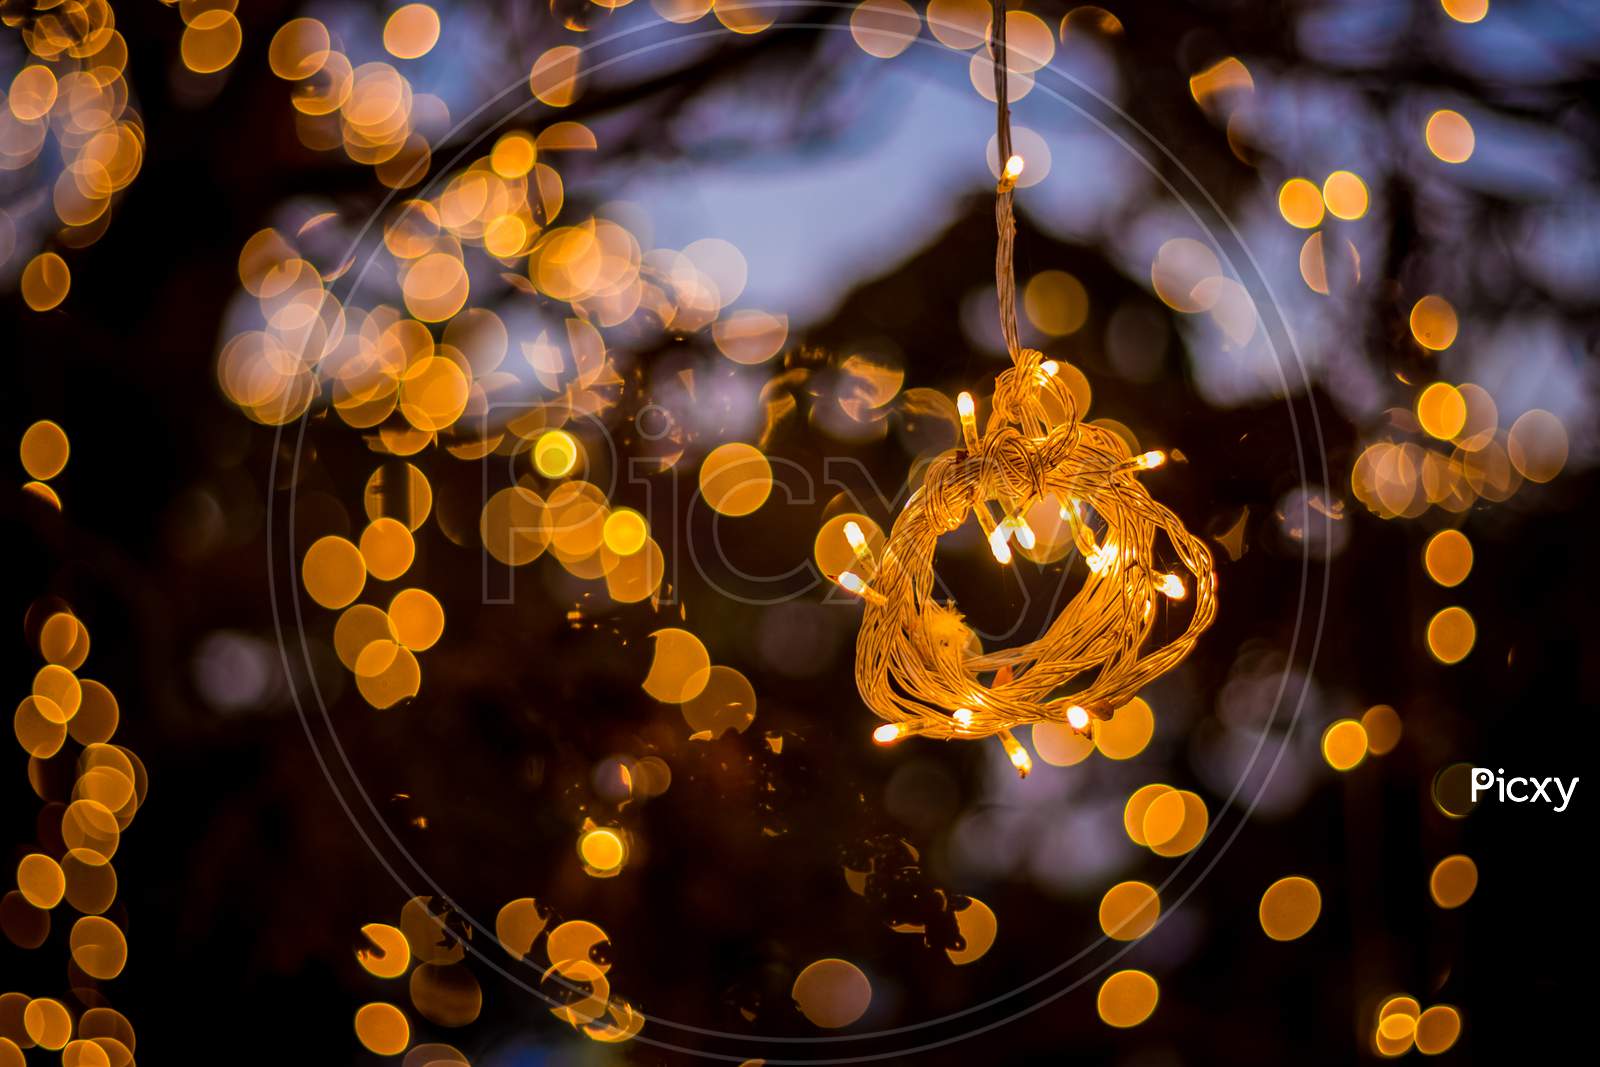 Bokeh Tree Light Decoration - Welcoming House And The Fabulous Party And Christmas Night - Outdoor Trees Have Been Decorated With Yellow Lights images